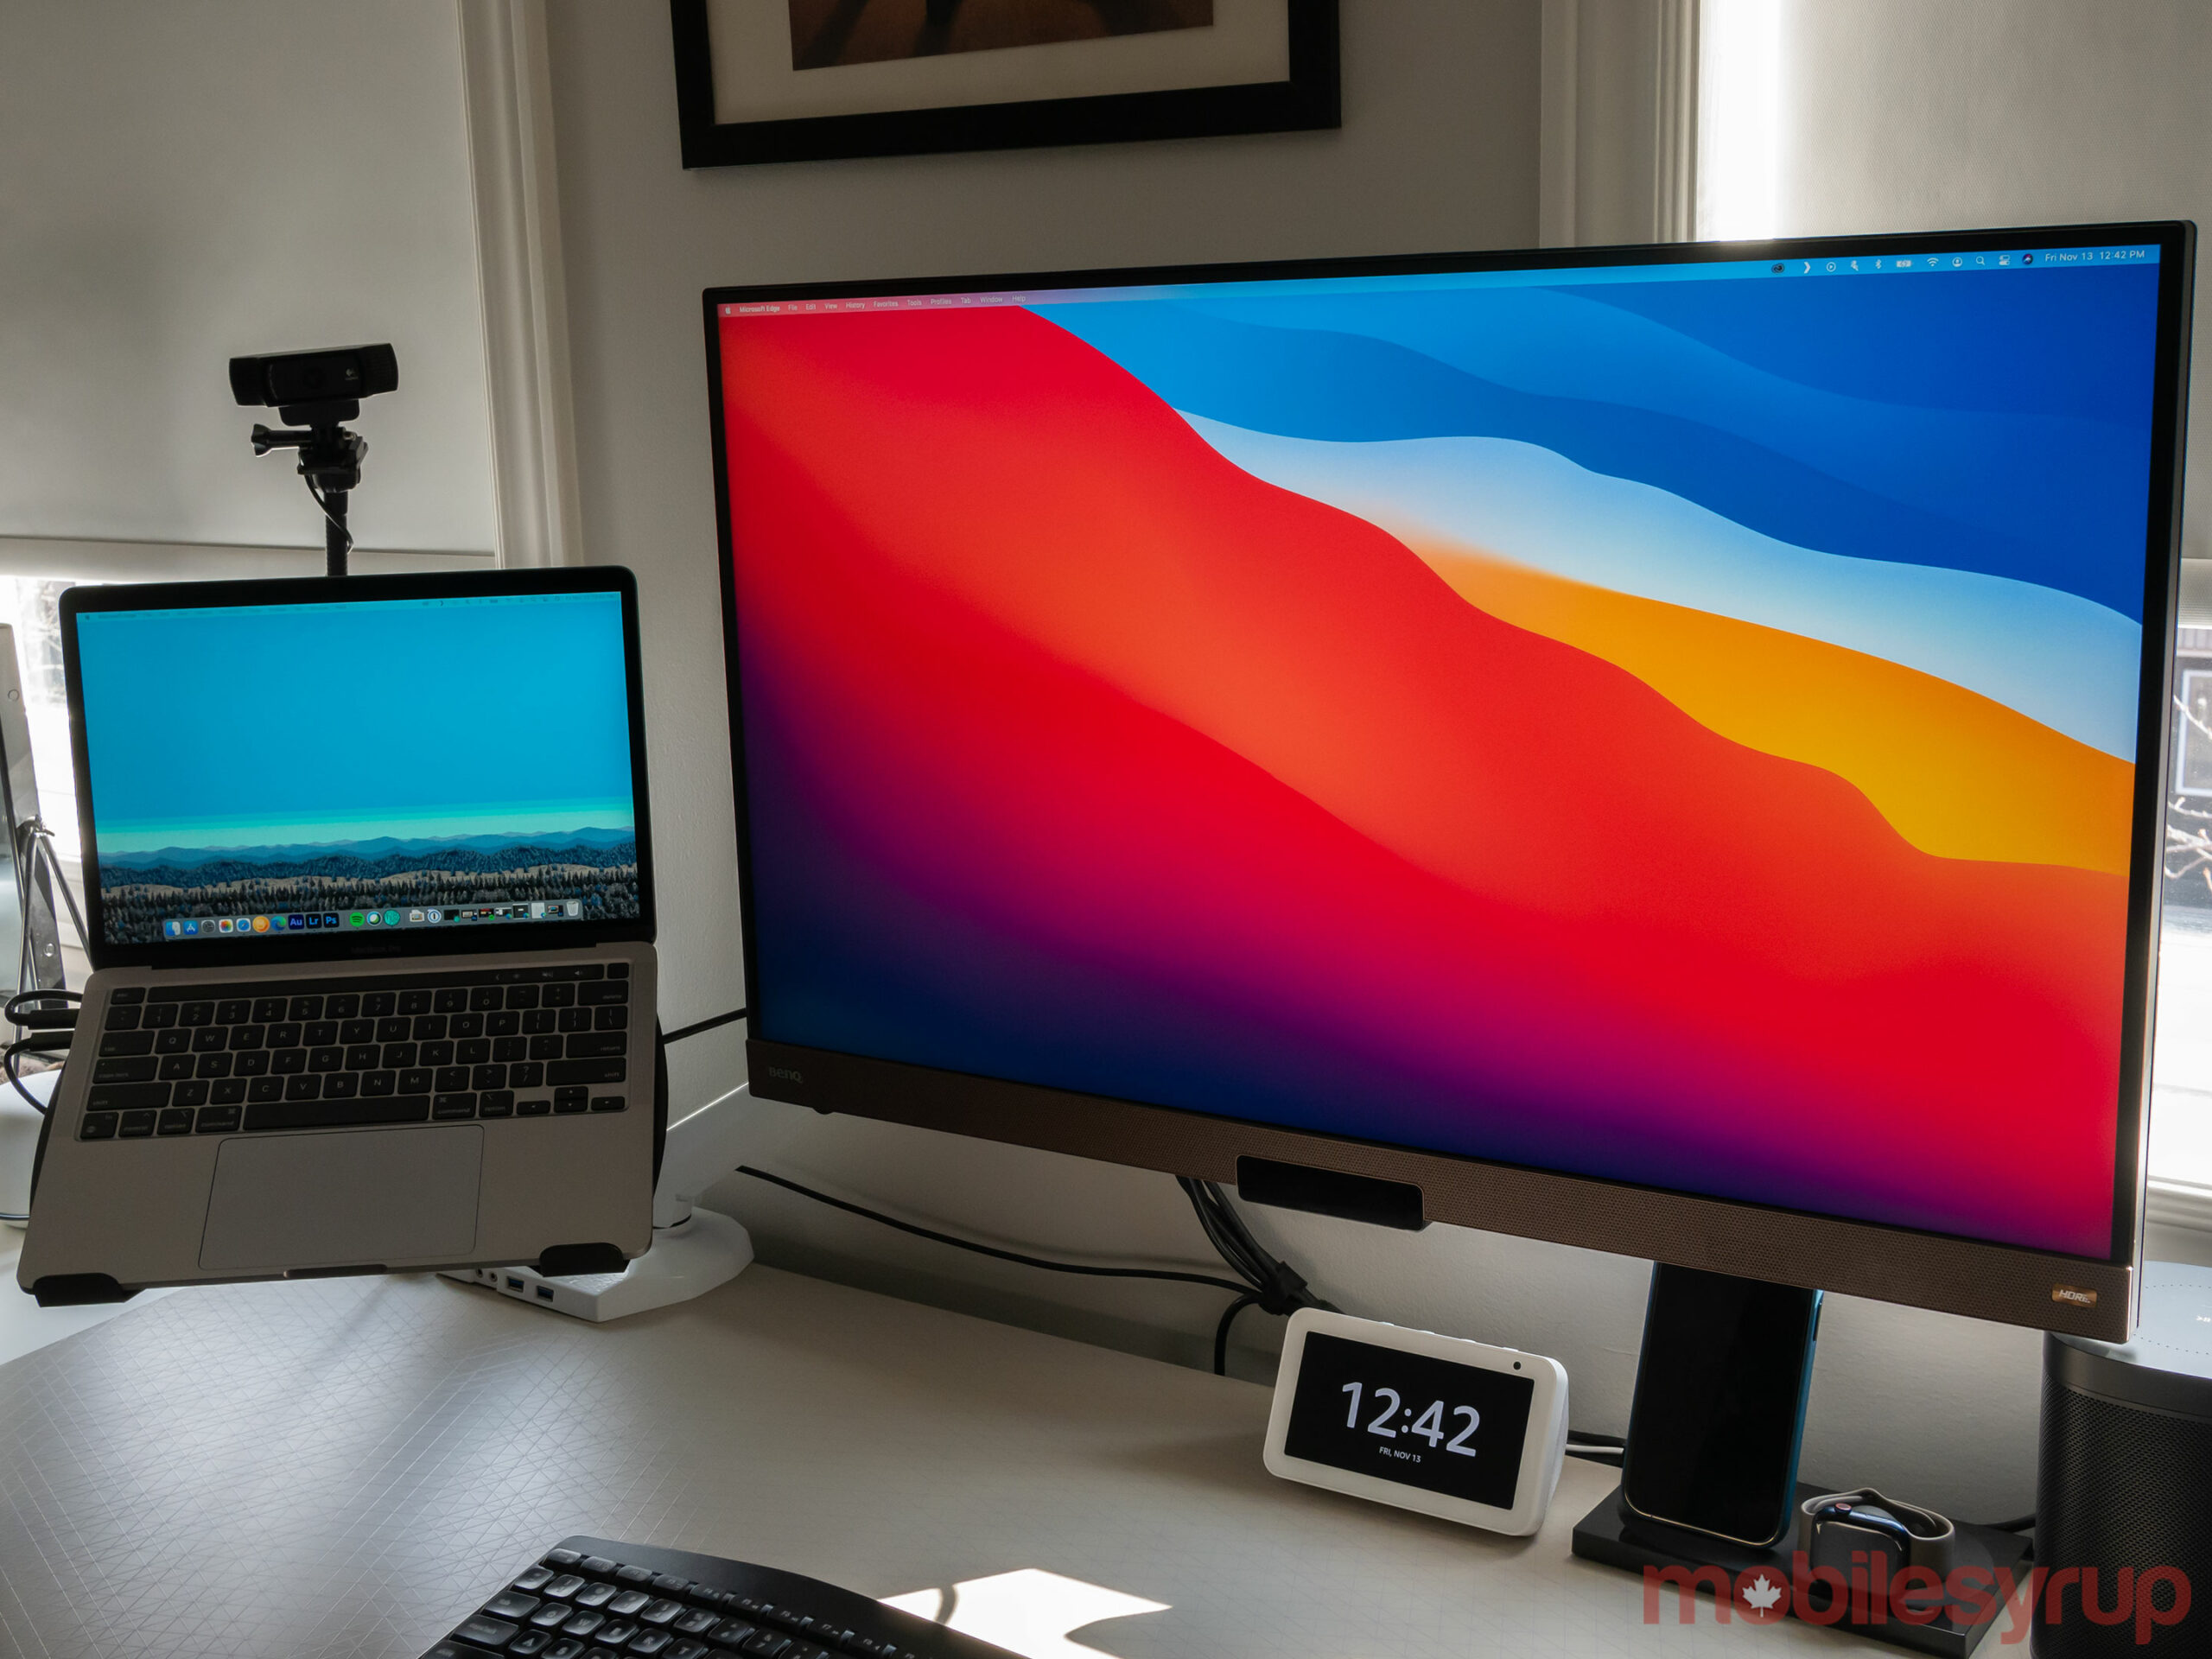 MacBook Pro connected to 4K monitor 